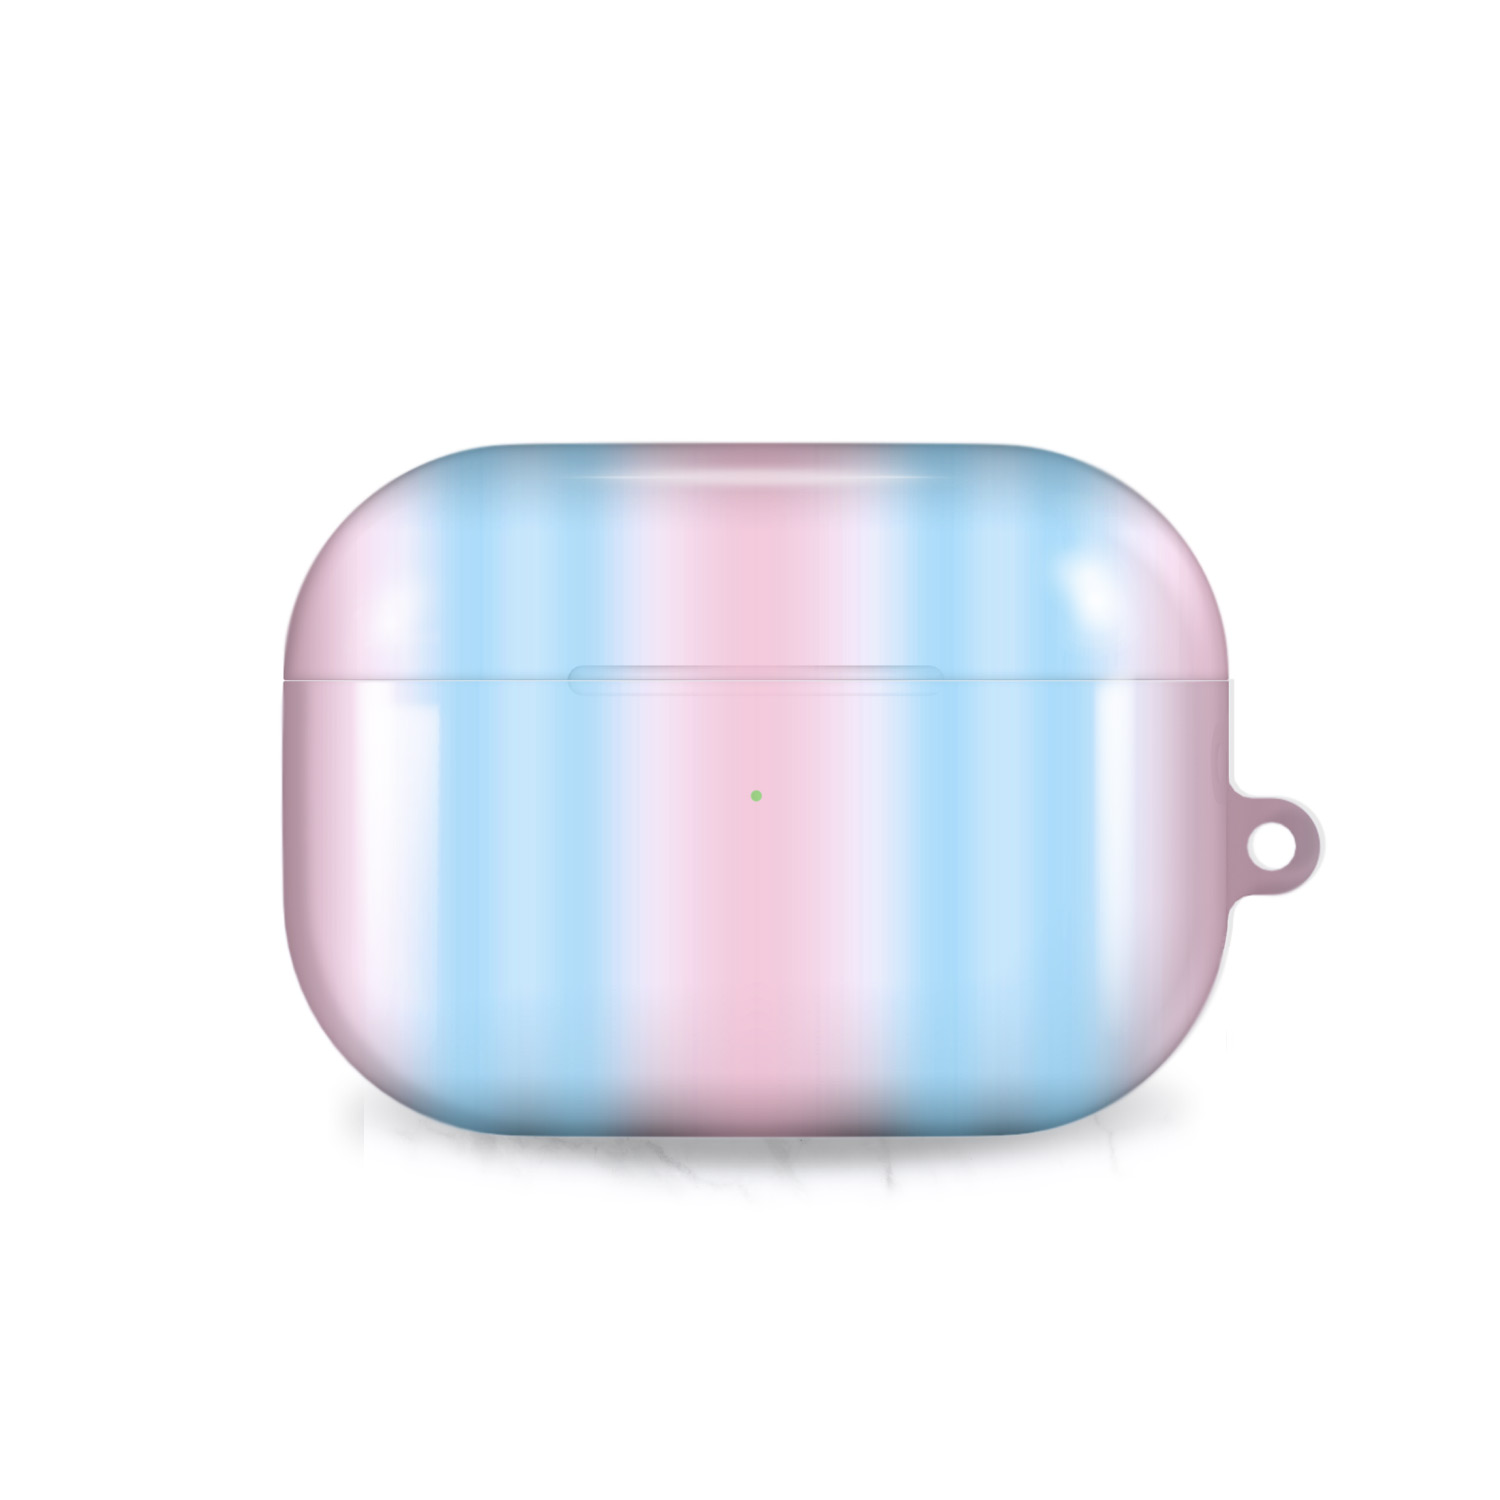 [airpods case] cottoncandy airpods hardcase